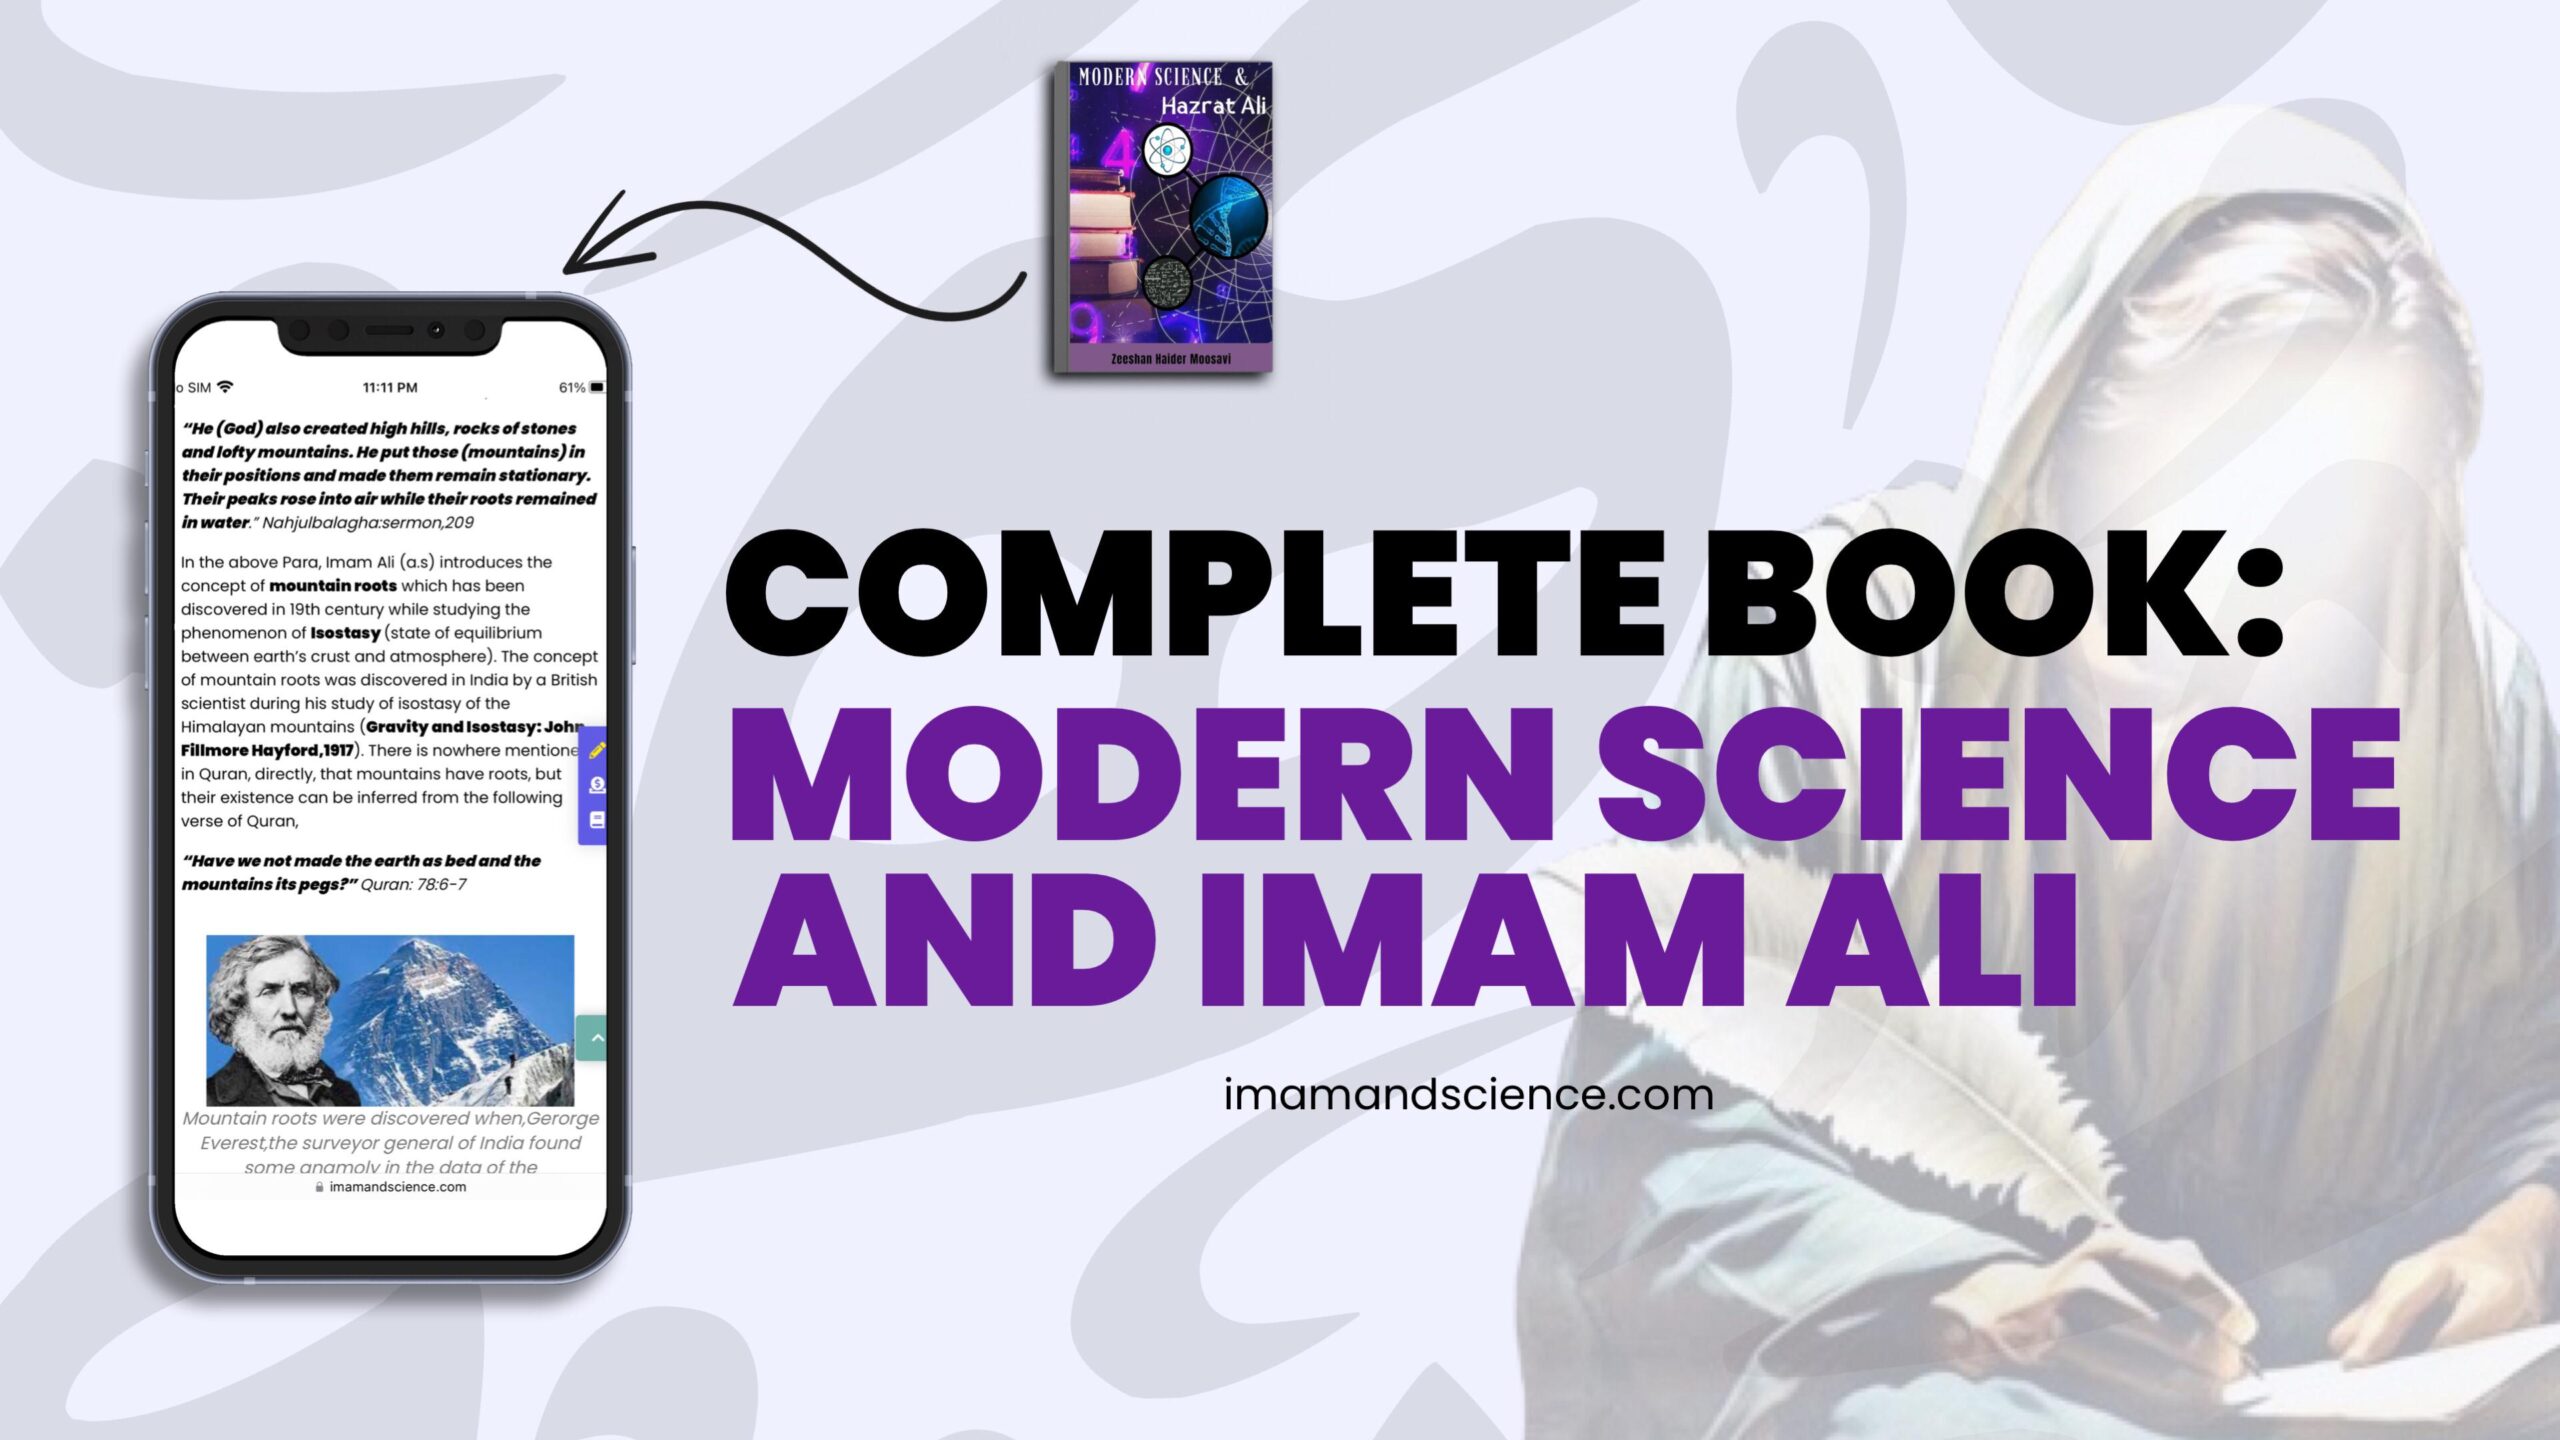 Book: Modern Science And Imam Ali